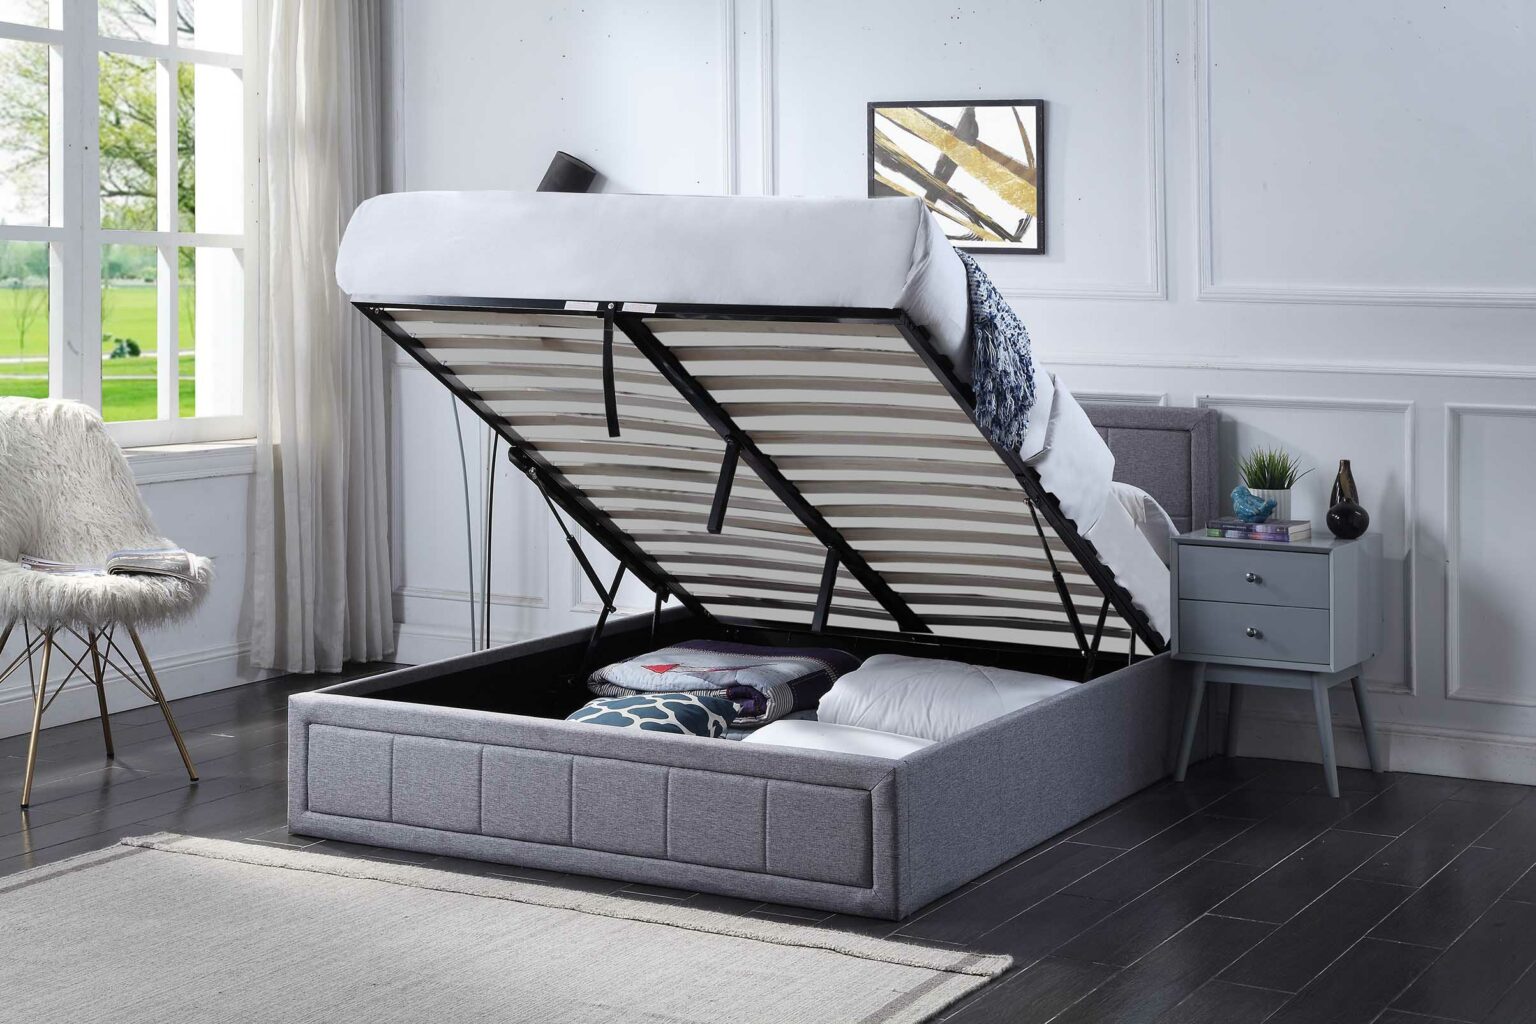 3 4 ottoman bed with mattress